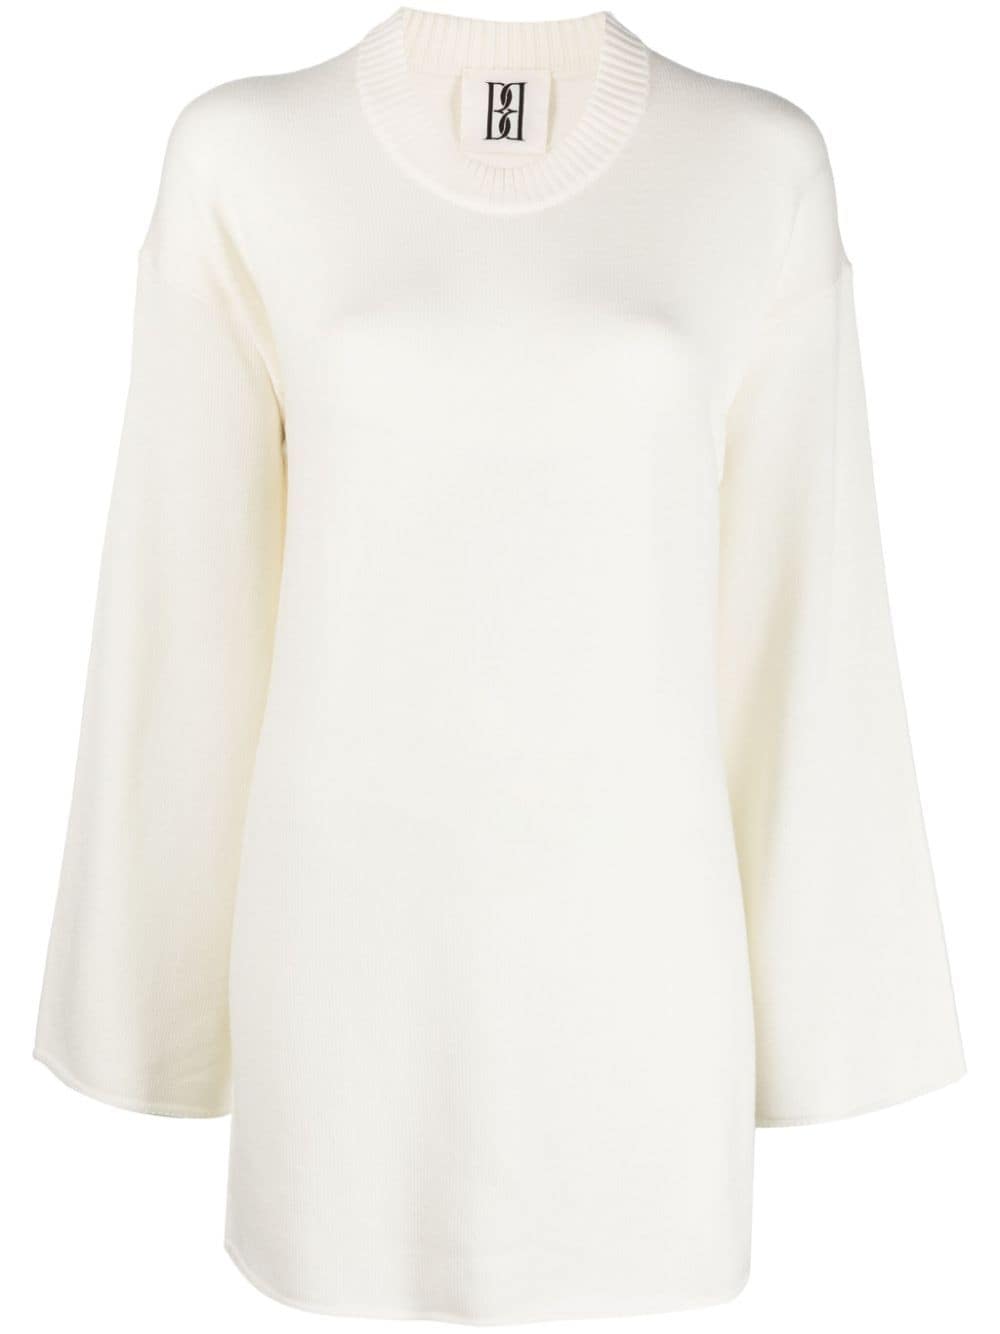 BY MALENE BIRGER ROLLED-TRIM KNITTED JUMPER